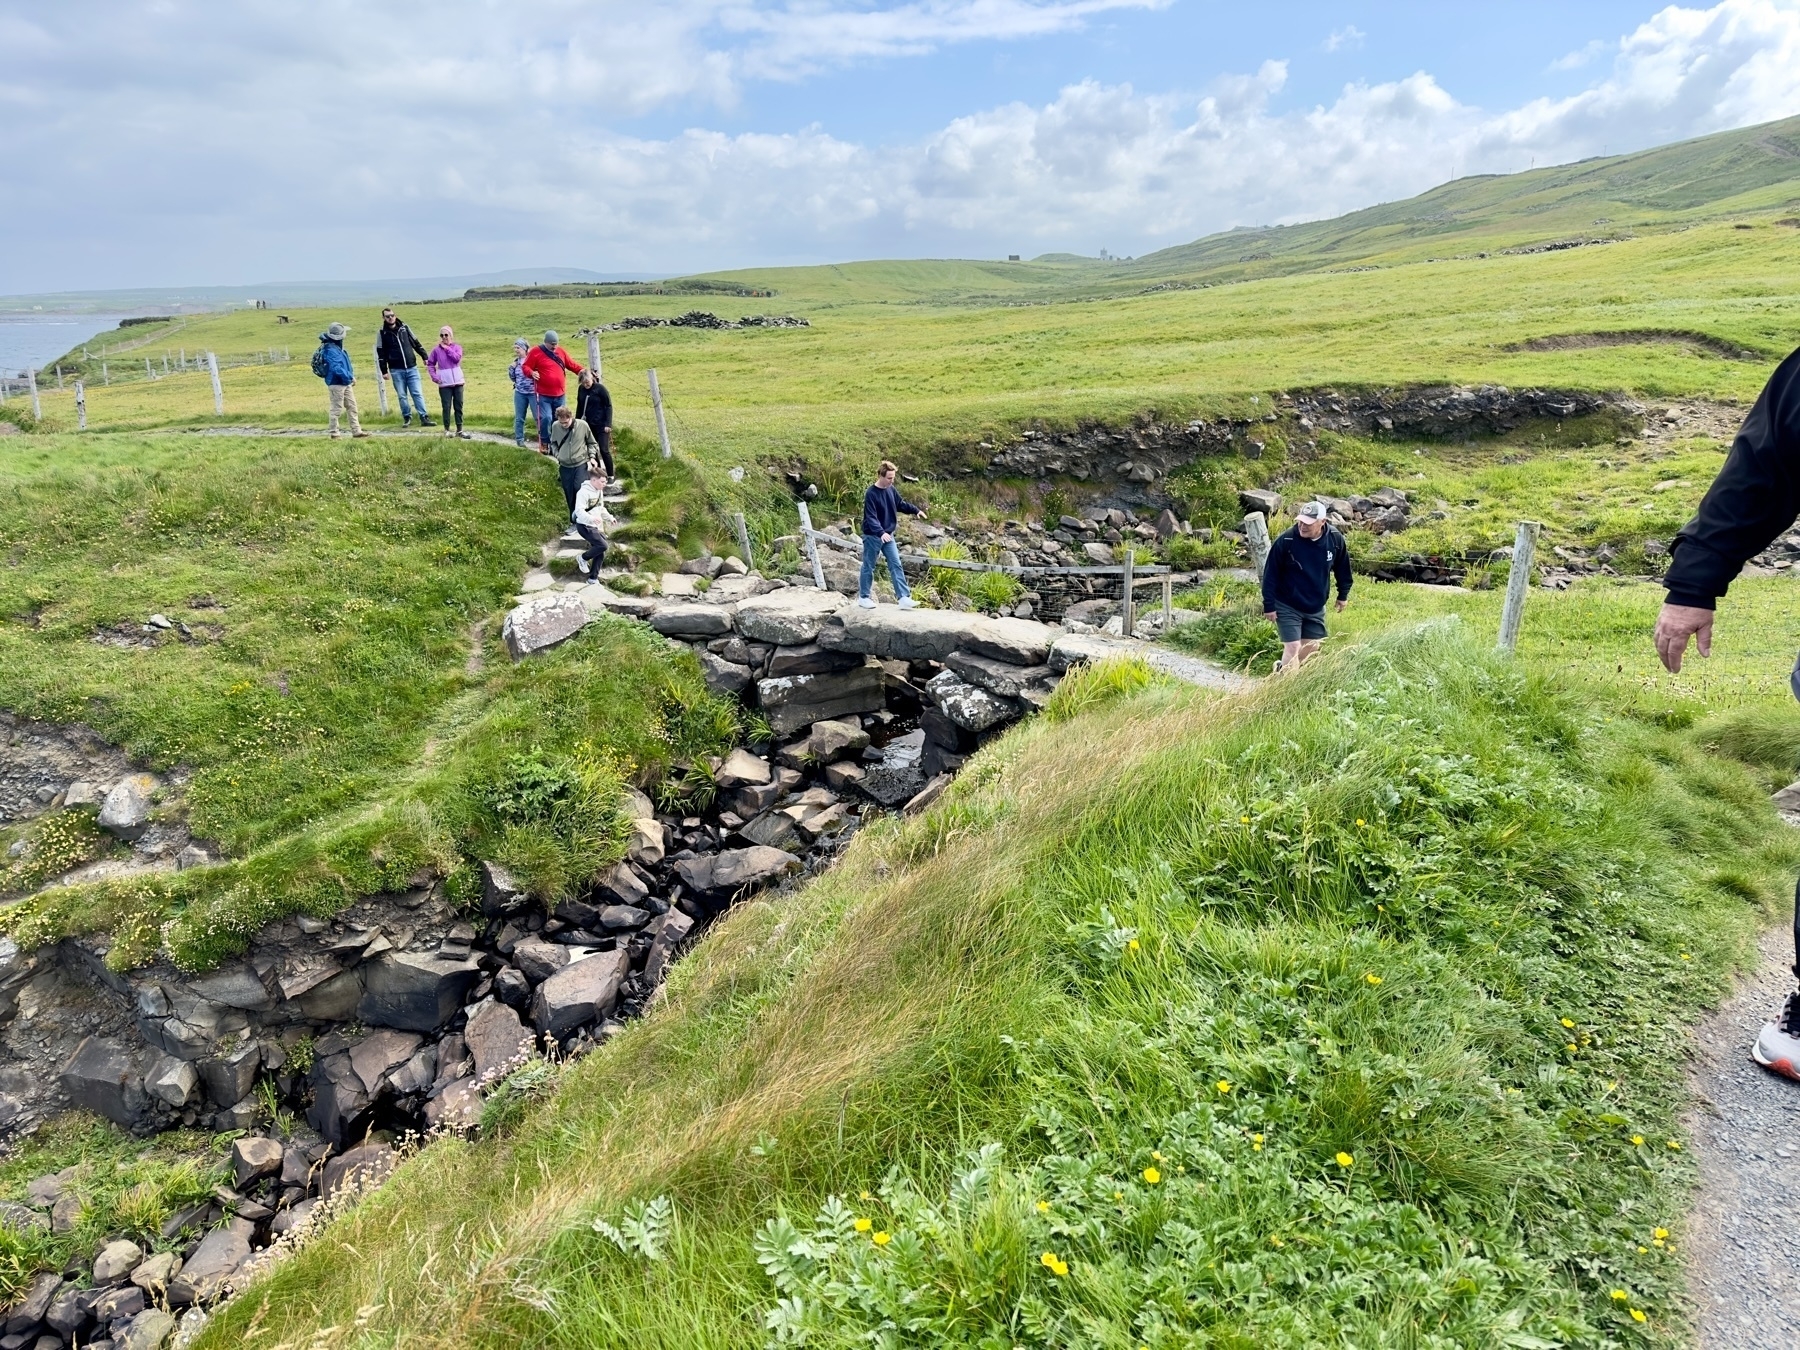 Auto-generated description: A group of people are walking on a trail through a grassy landscape with stone steps and a bridge on a bright, partly cloudy day.